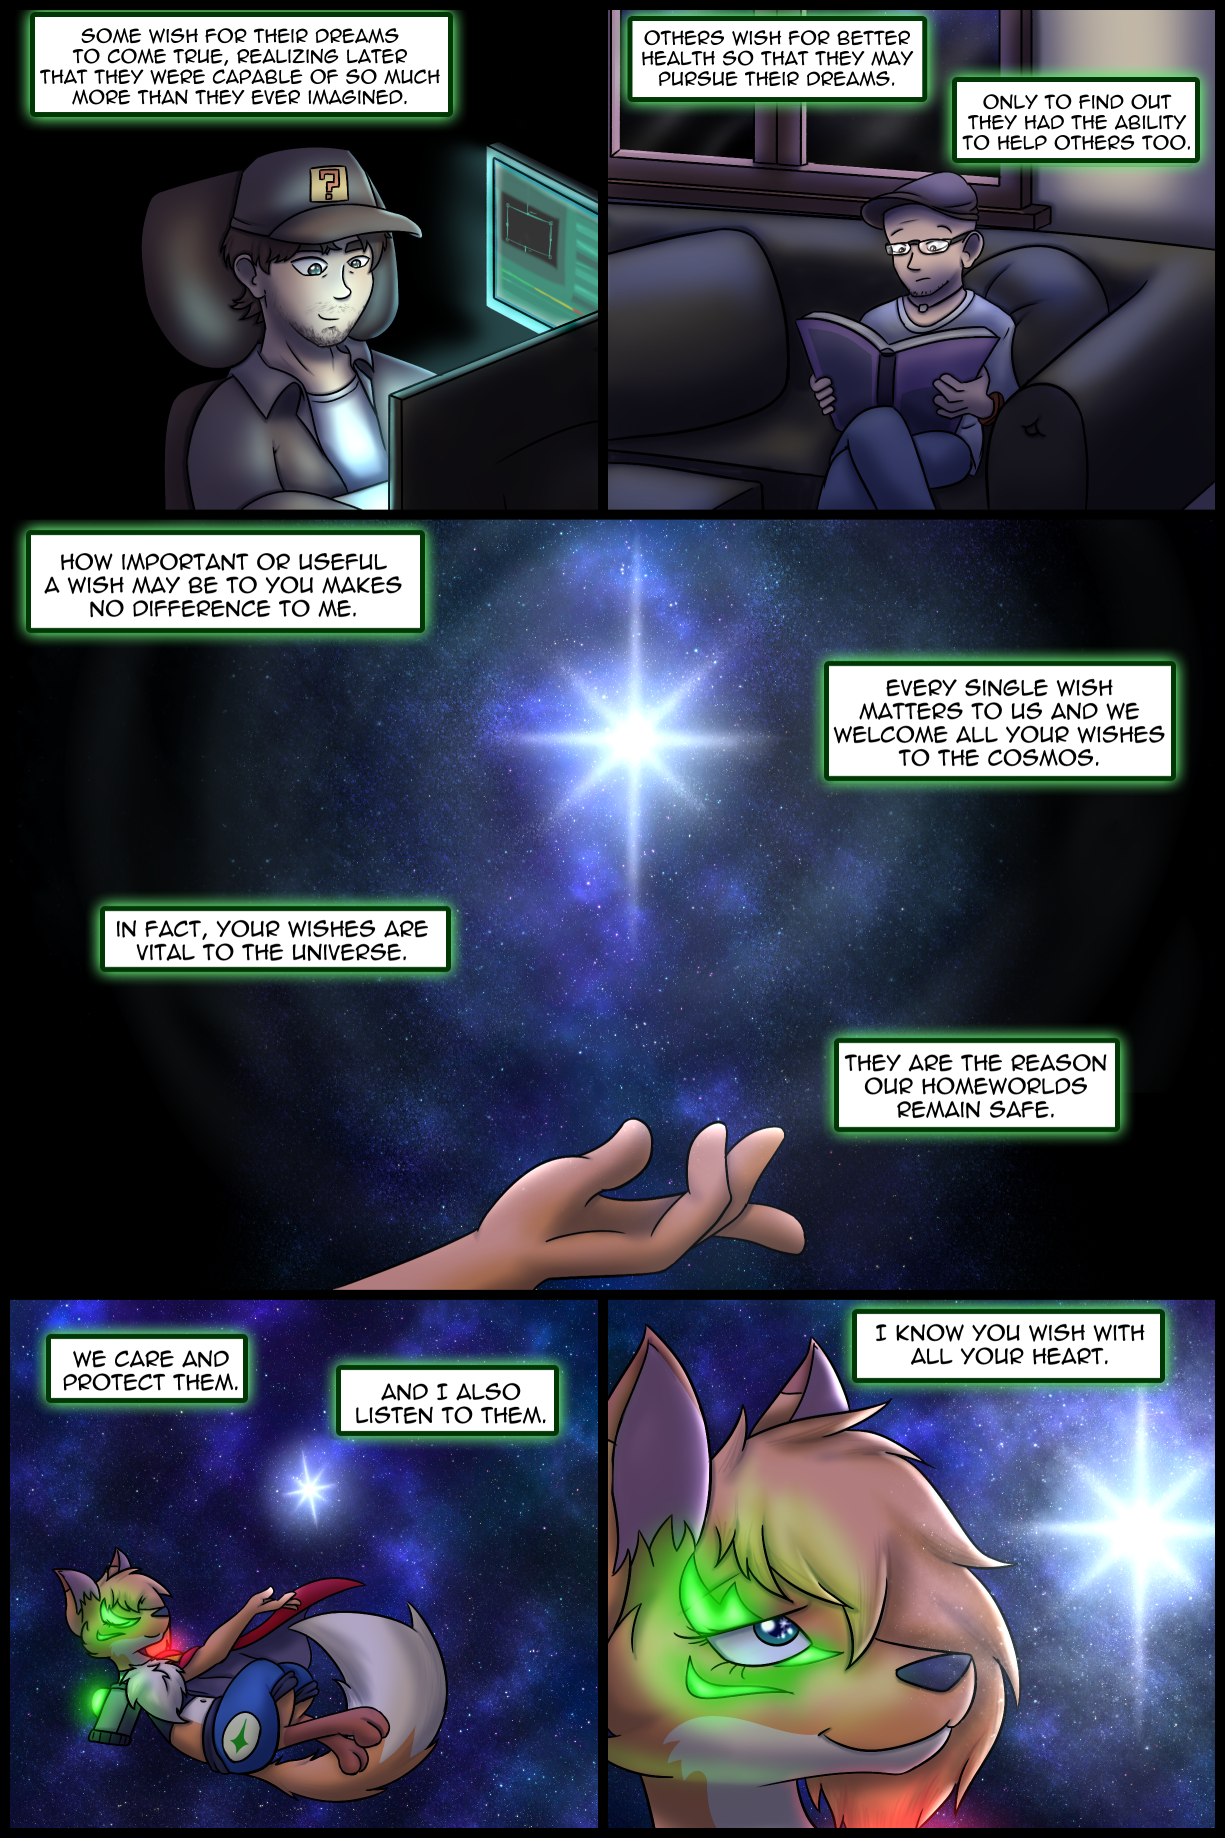 Ch0 Remastered Page 3-4 – The Value of Wishes – Nurturing Wishes